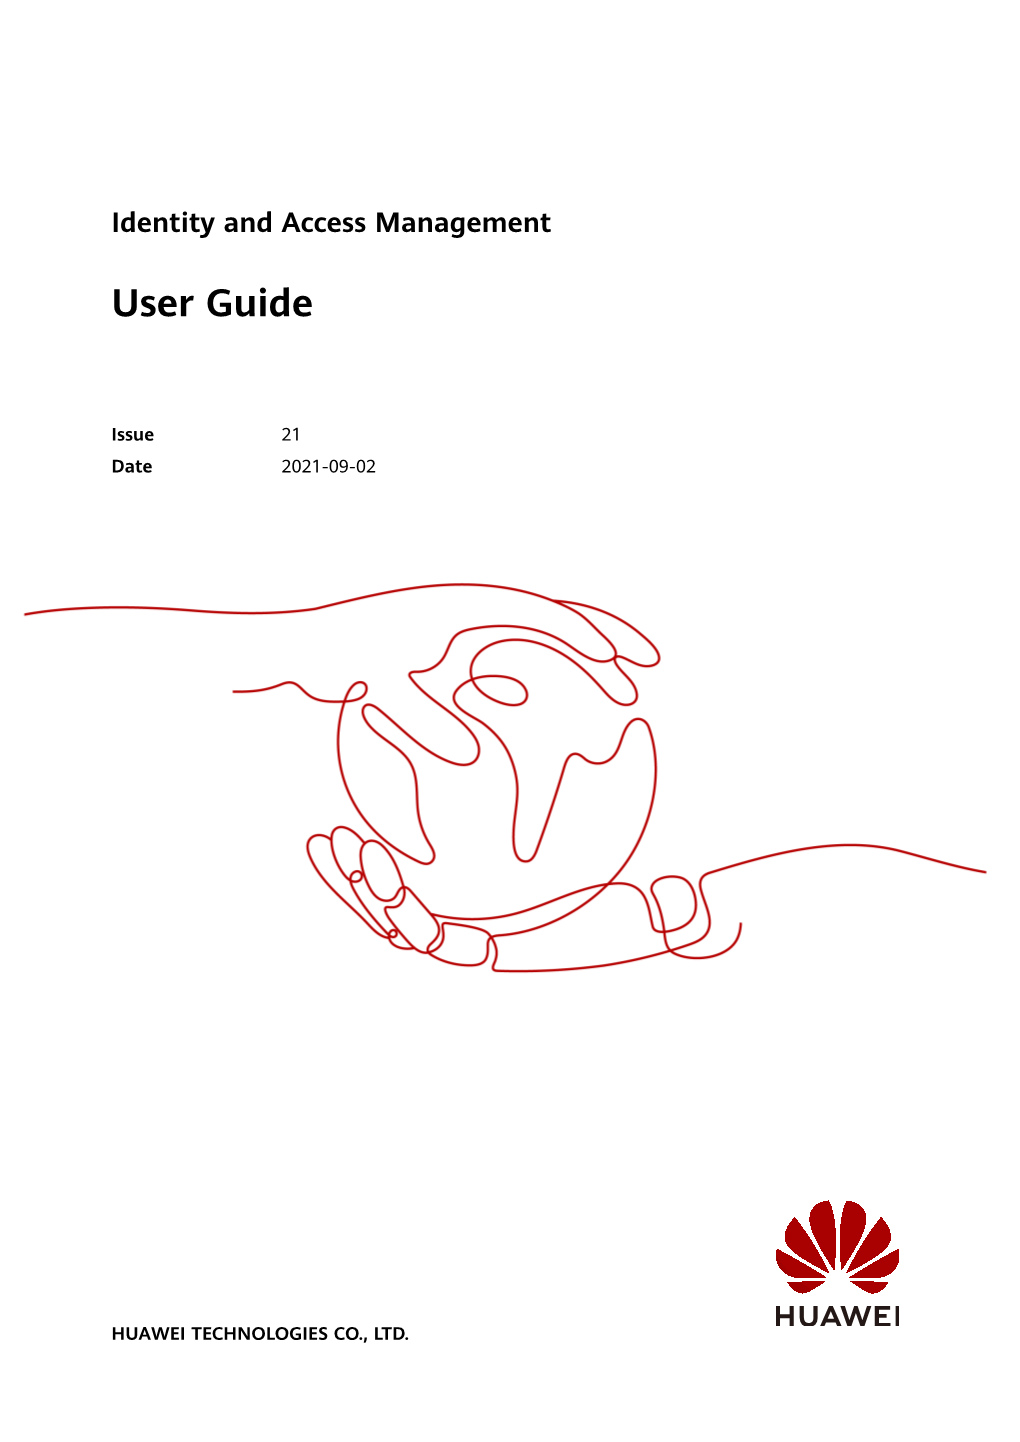 Identity and Access Management User Guide Contents